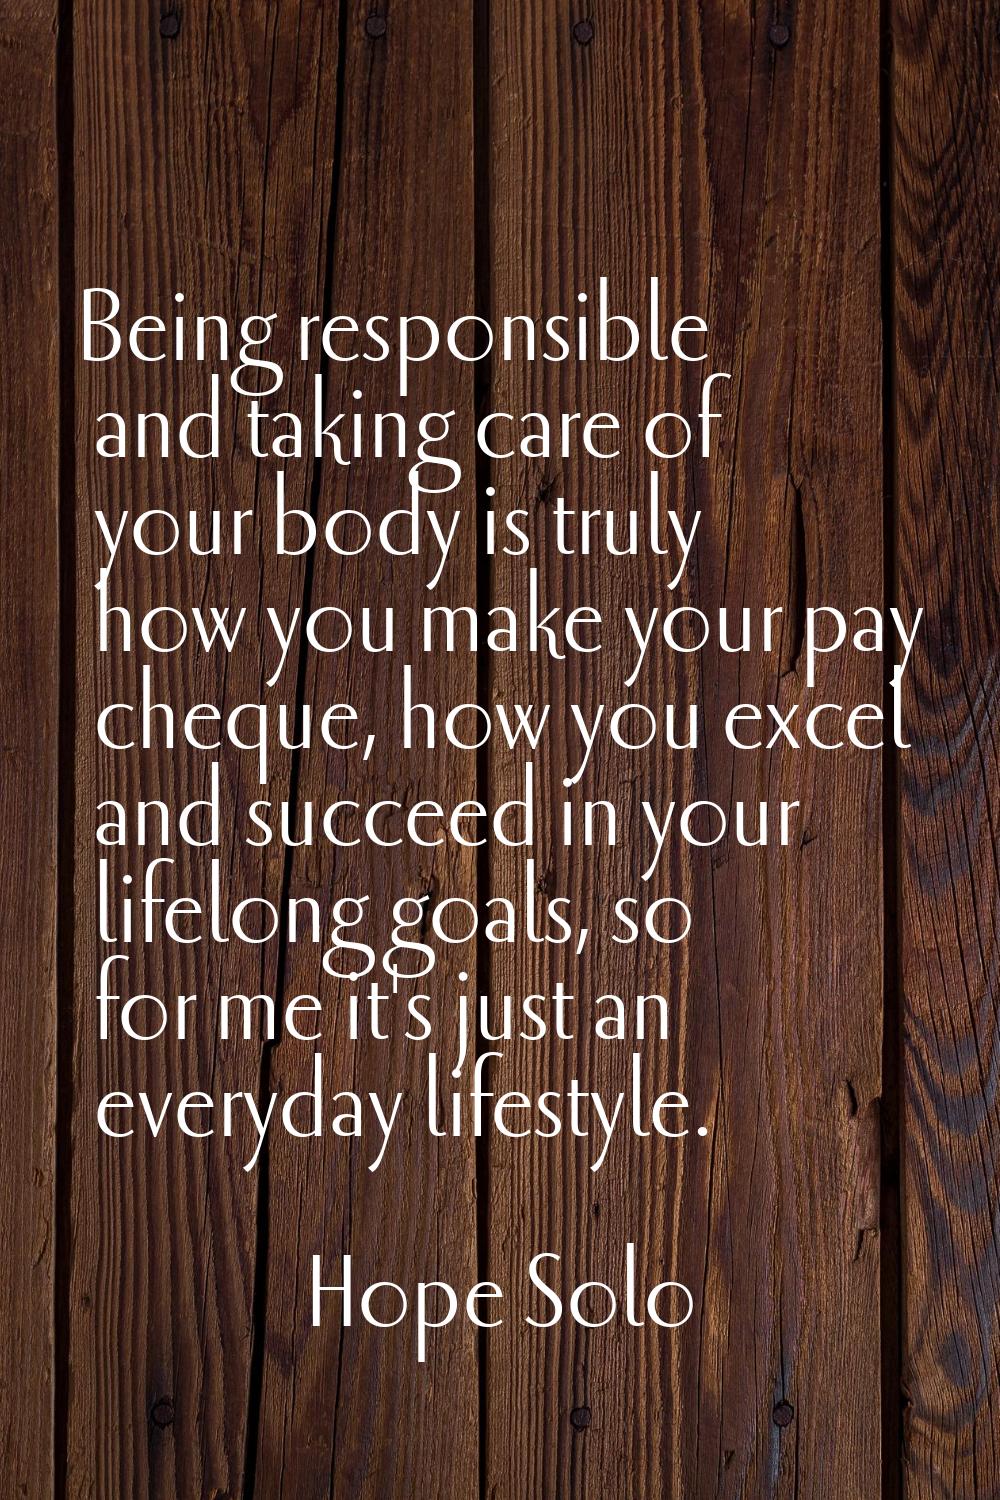 Being responsible and taking care of your body is truly how you make your pay cheque, how you excel